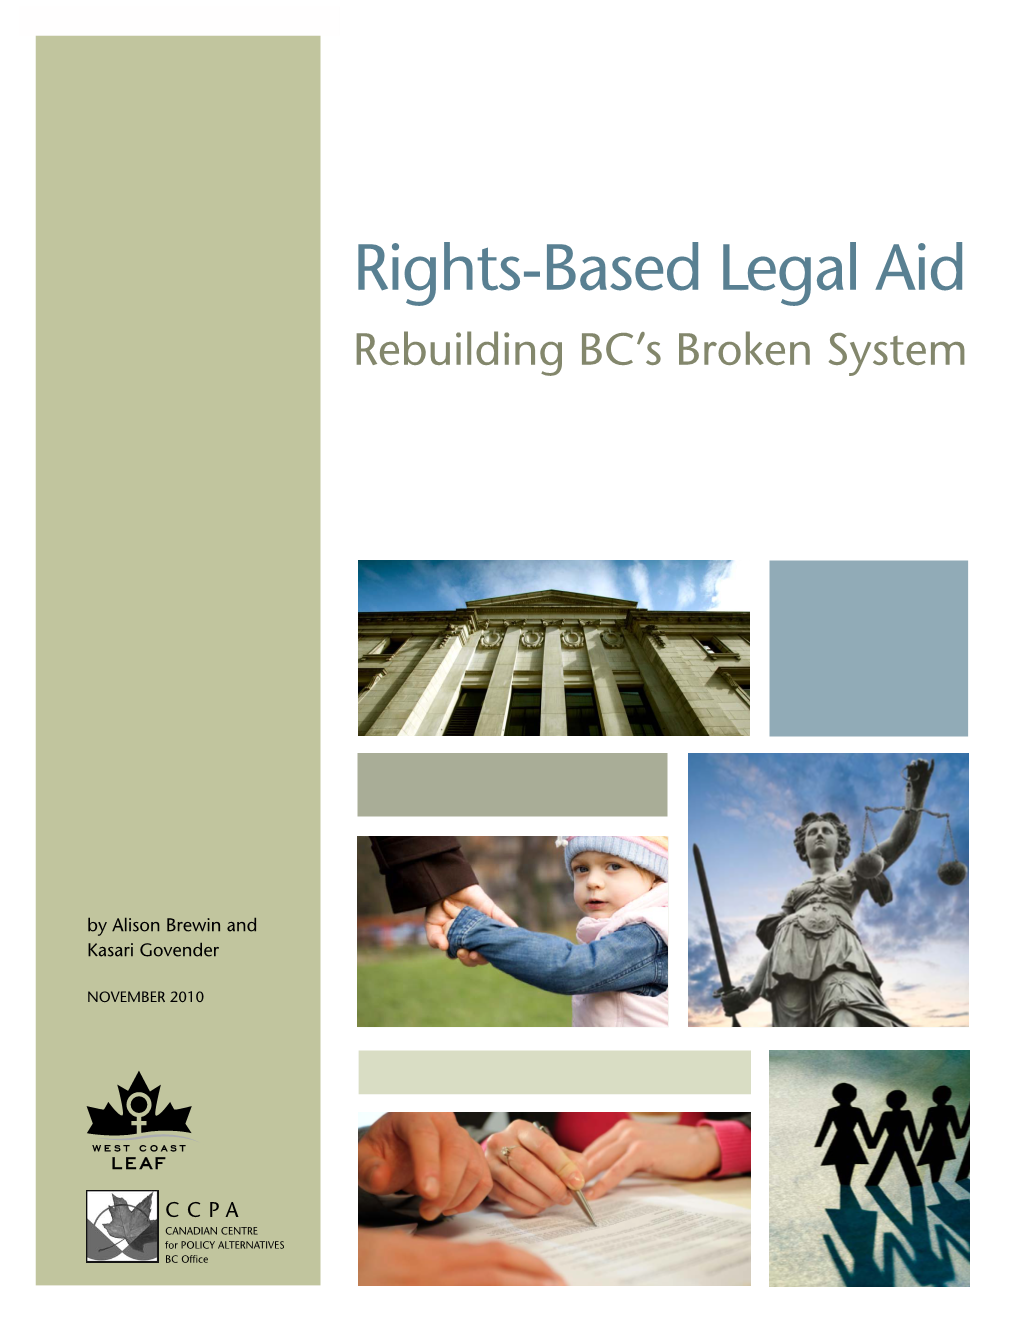 Rights-Based Legal Aid: Rebuilding BC's Broken System